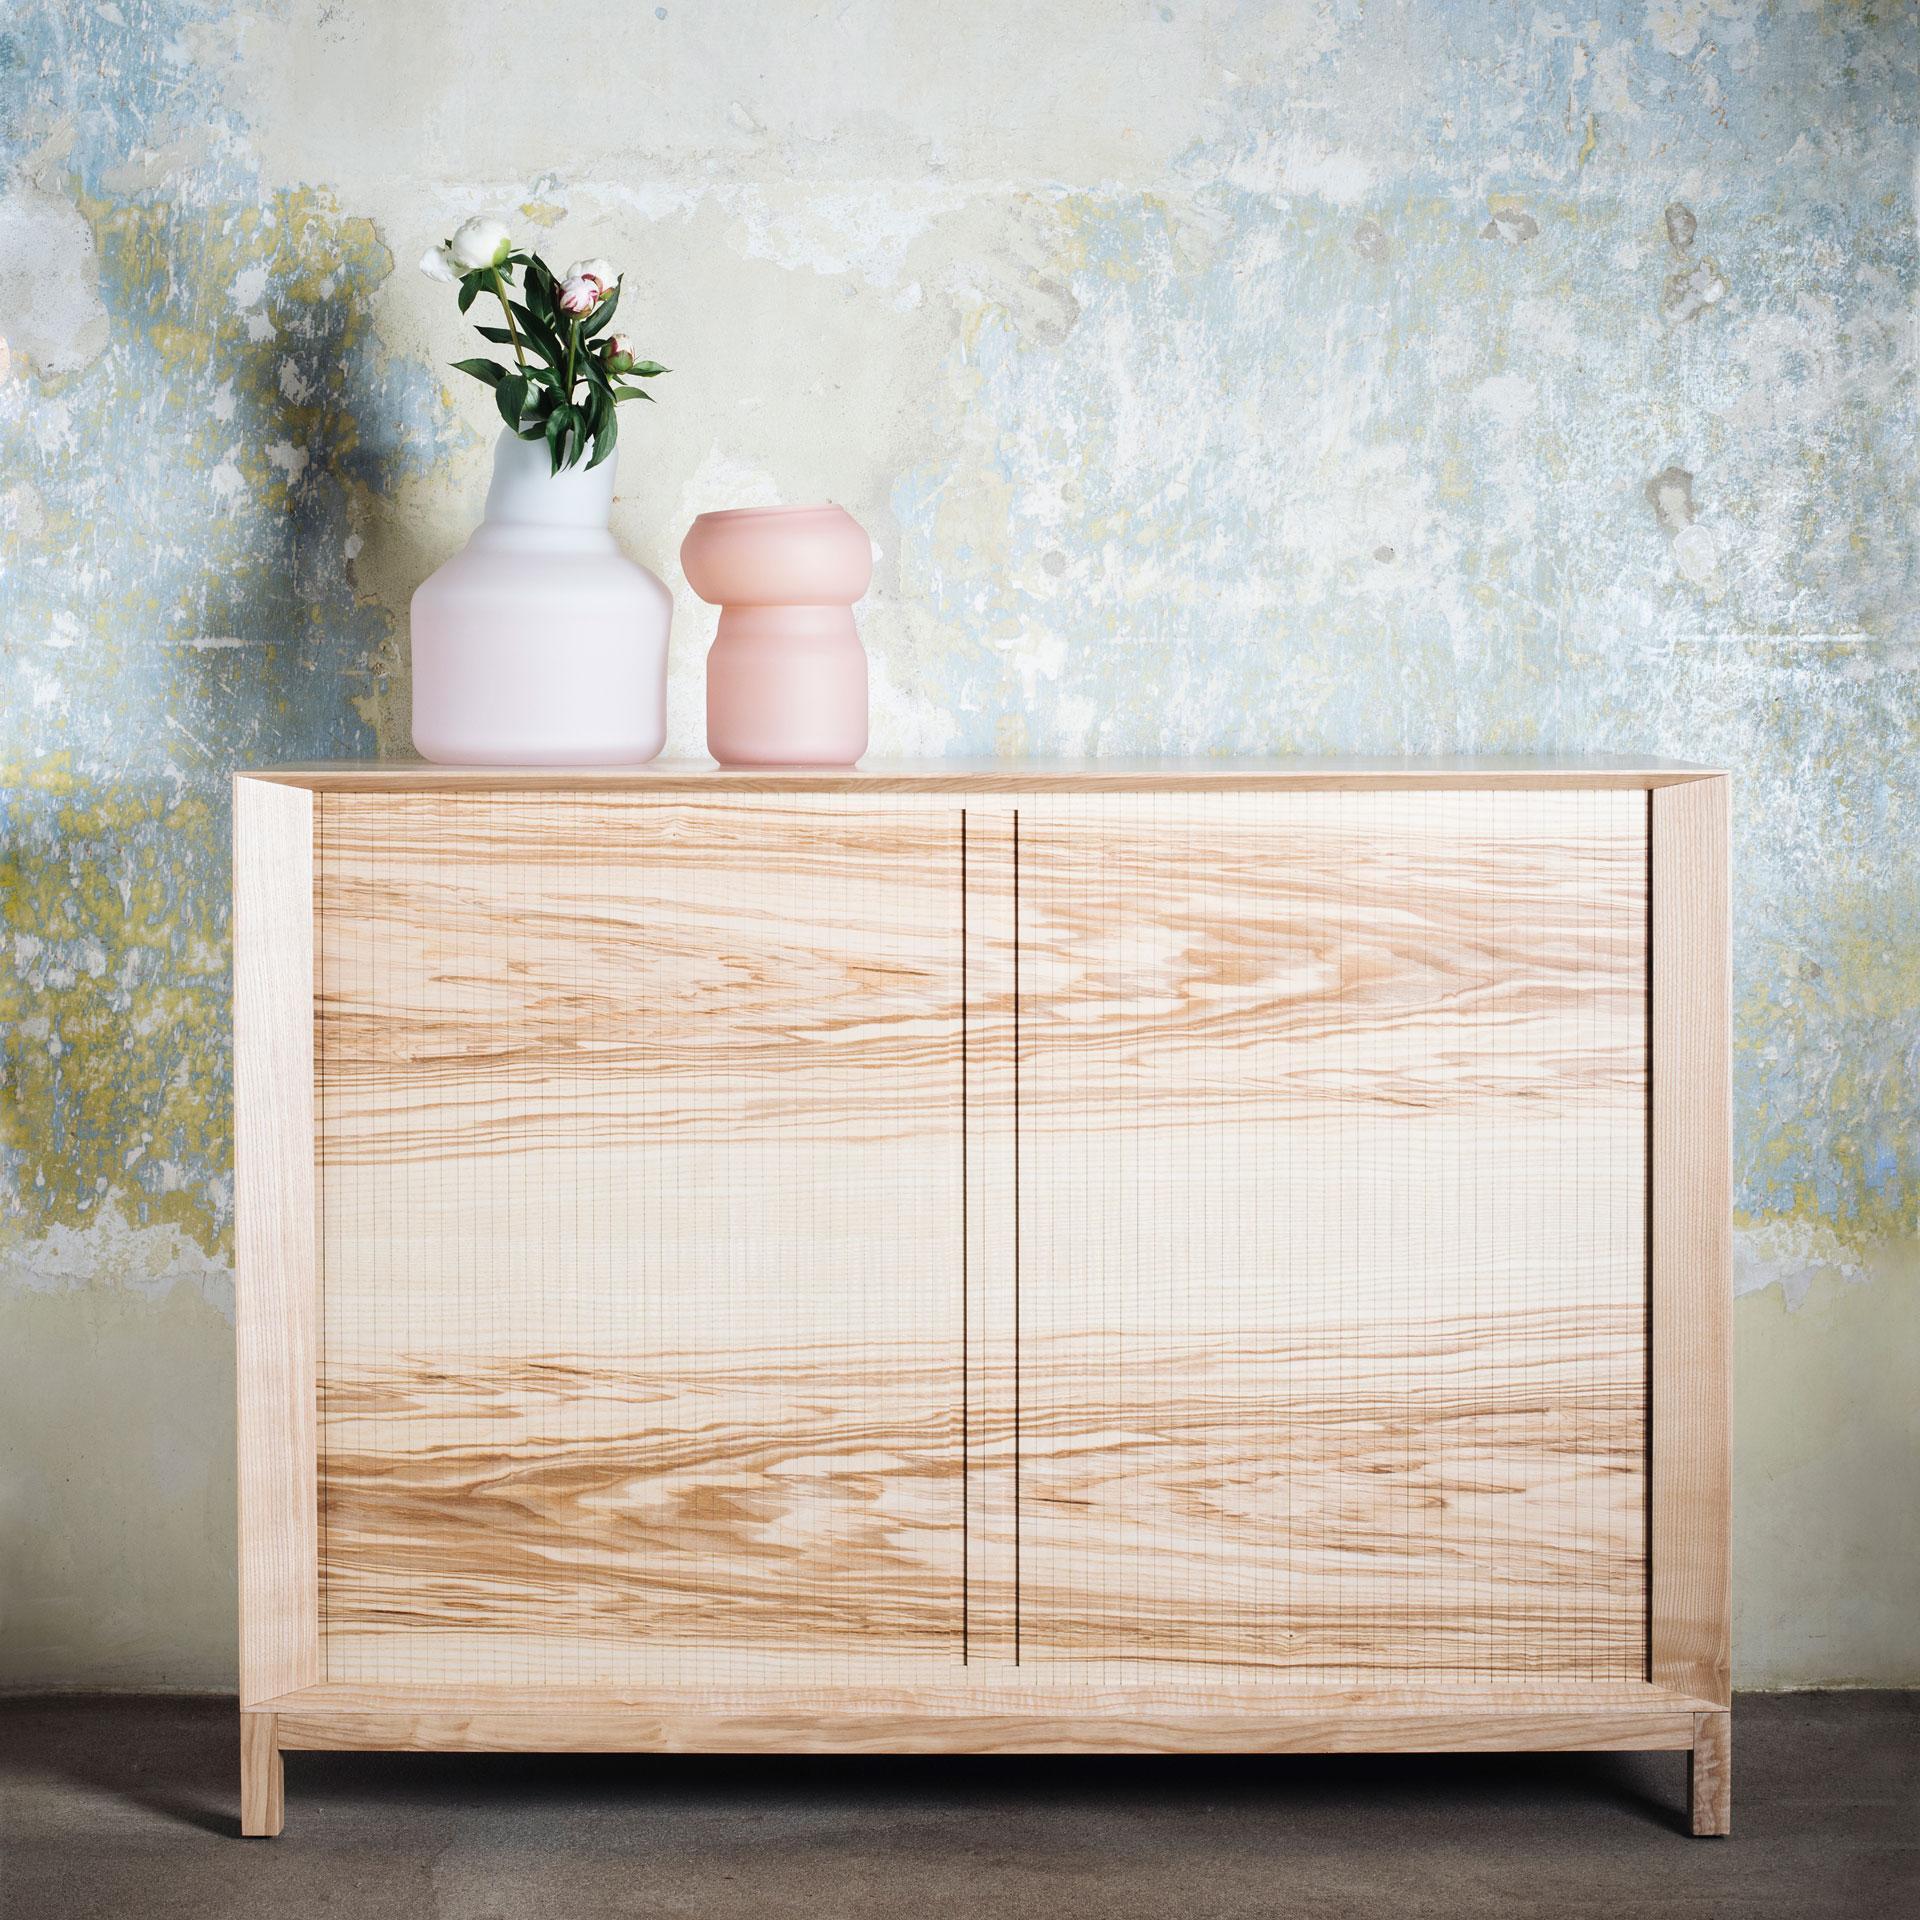 ROLLETA designed by Herrmann & Coufal and manufactured by local Czech design studio FUTURO presents the variety of ash tree drawings, craftsmanship and a specific opening system.
It was first presented at the Designblok Prague 2020 show and soon